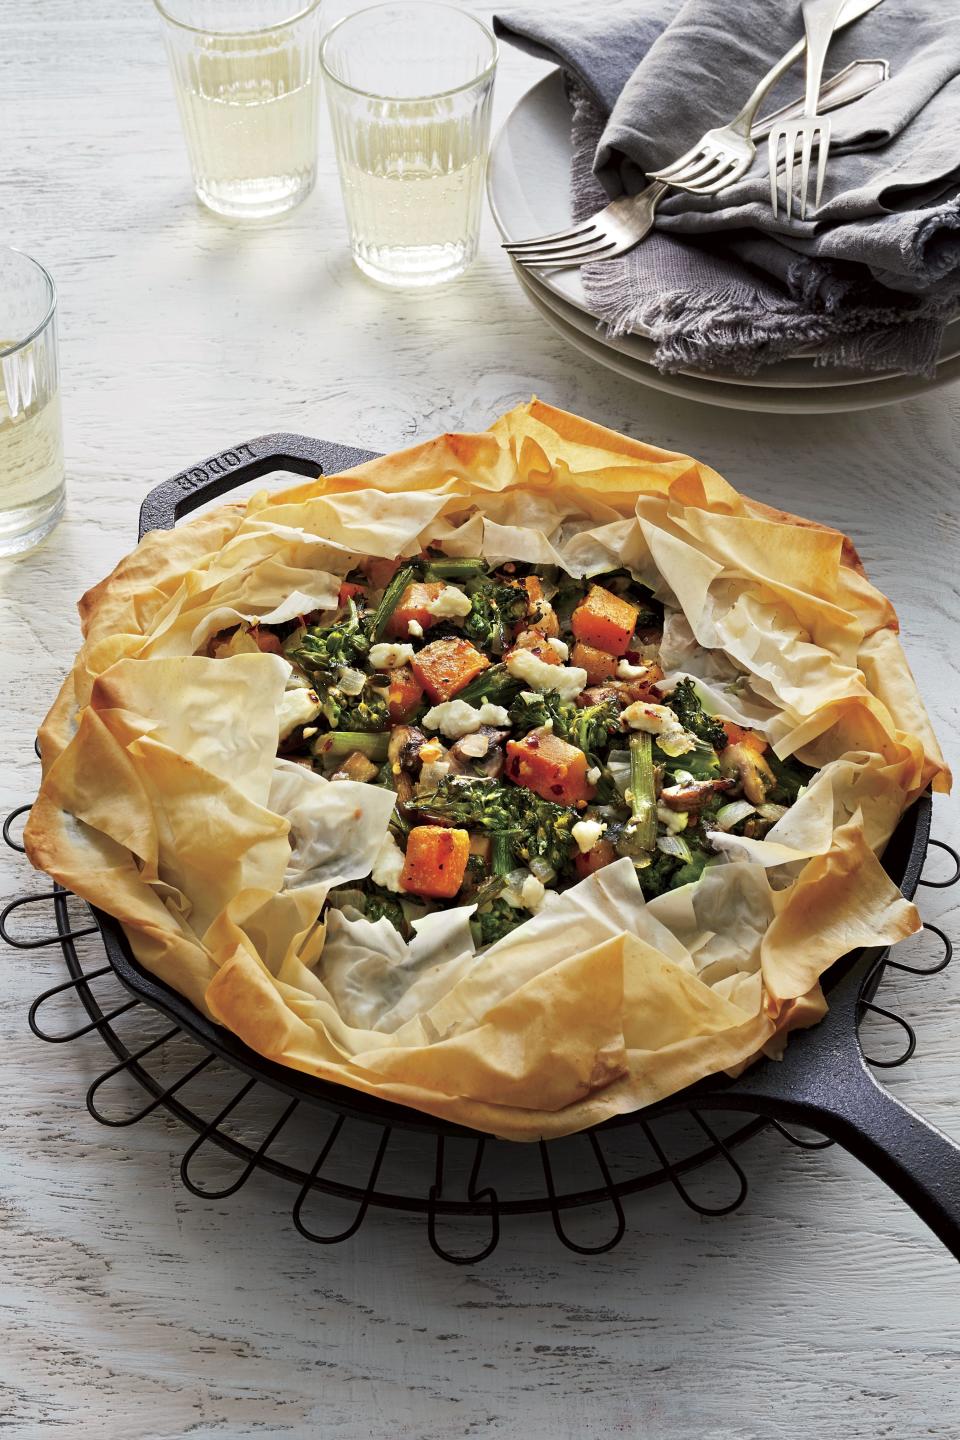 Skillet Vegetable Pie with Goat Cheese